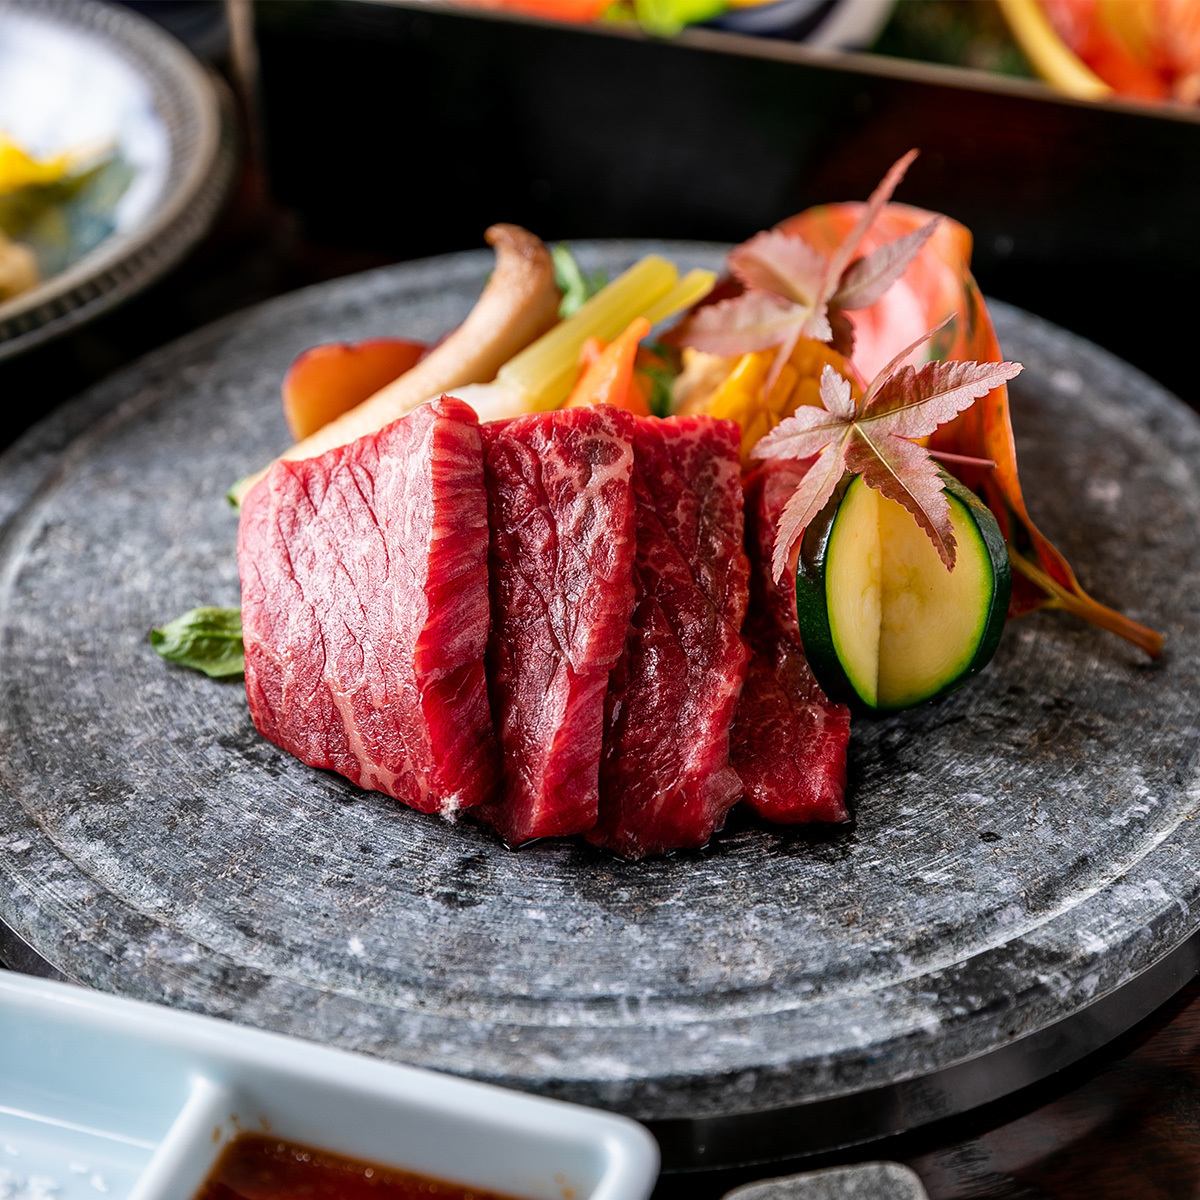 Enjoy dishes made with carefully selected ingredients such as Kuroge Wagyu beef!